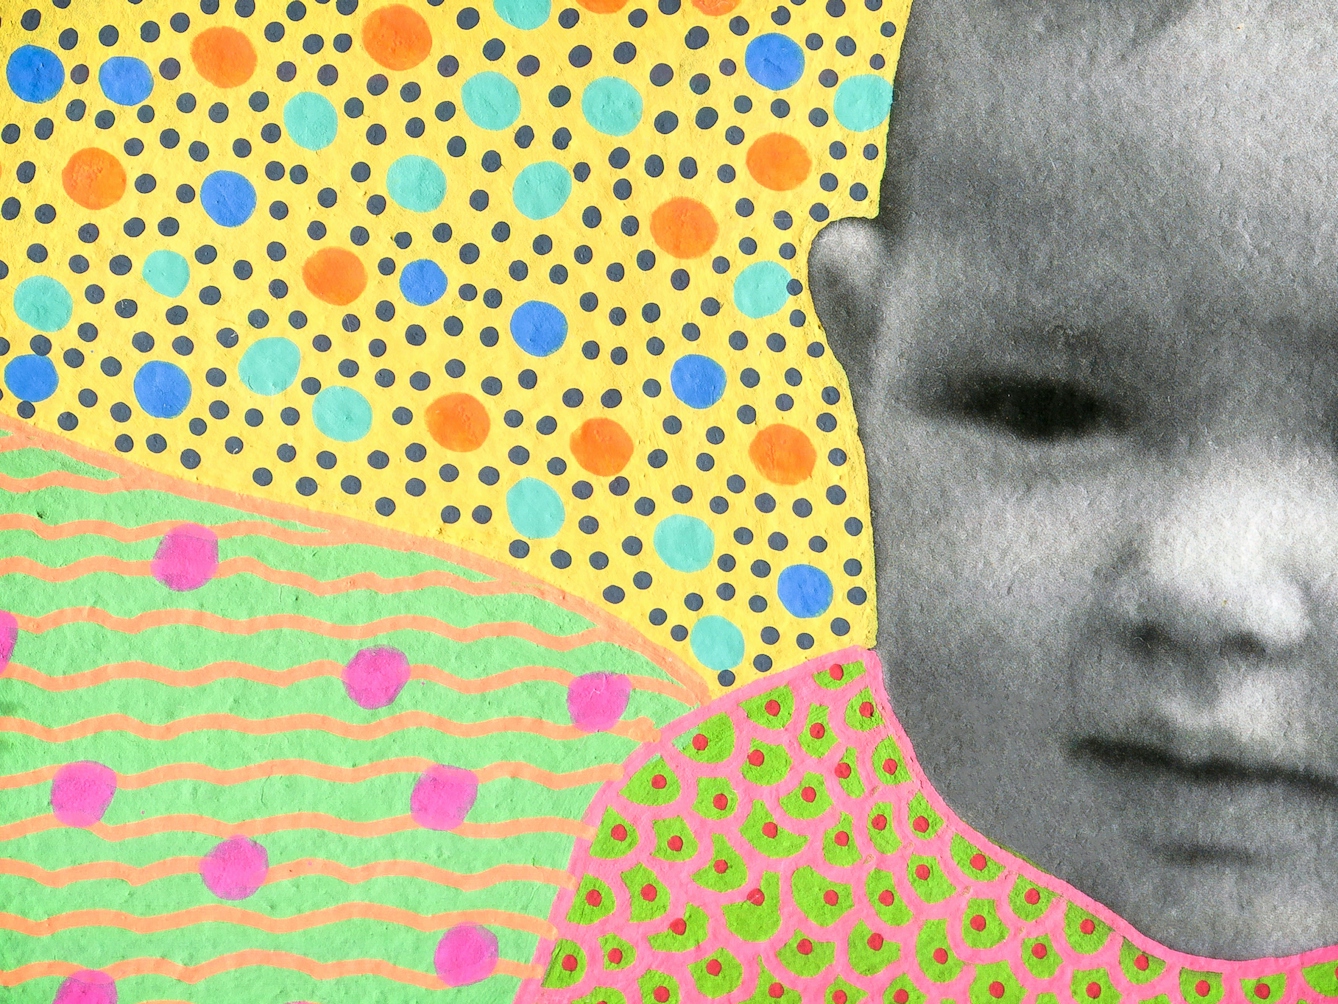 Artwork created by painting over the surface of a black and white photographic print with colourful paint. The artwork shows the original head of a young baby cropped in close.  Apart from the head the top left of the image is a painted yellow background covered in small green, orange and blue dots. The bottom left corner has a green background with wavy orange horizontal lines and pink spots. The baby's clothes are painted differently with a green background with pink cell like patterns with red centres. The texture of the paint can be seen, including the boundary between the painted area and the original photographic print.